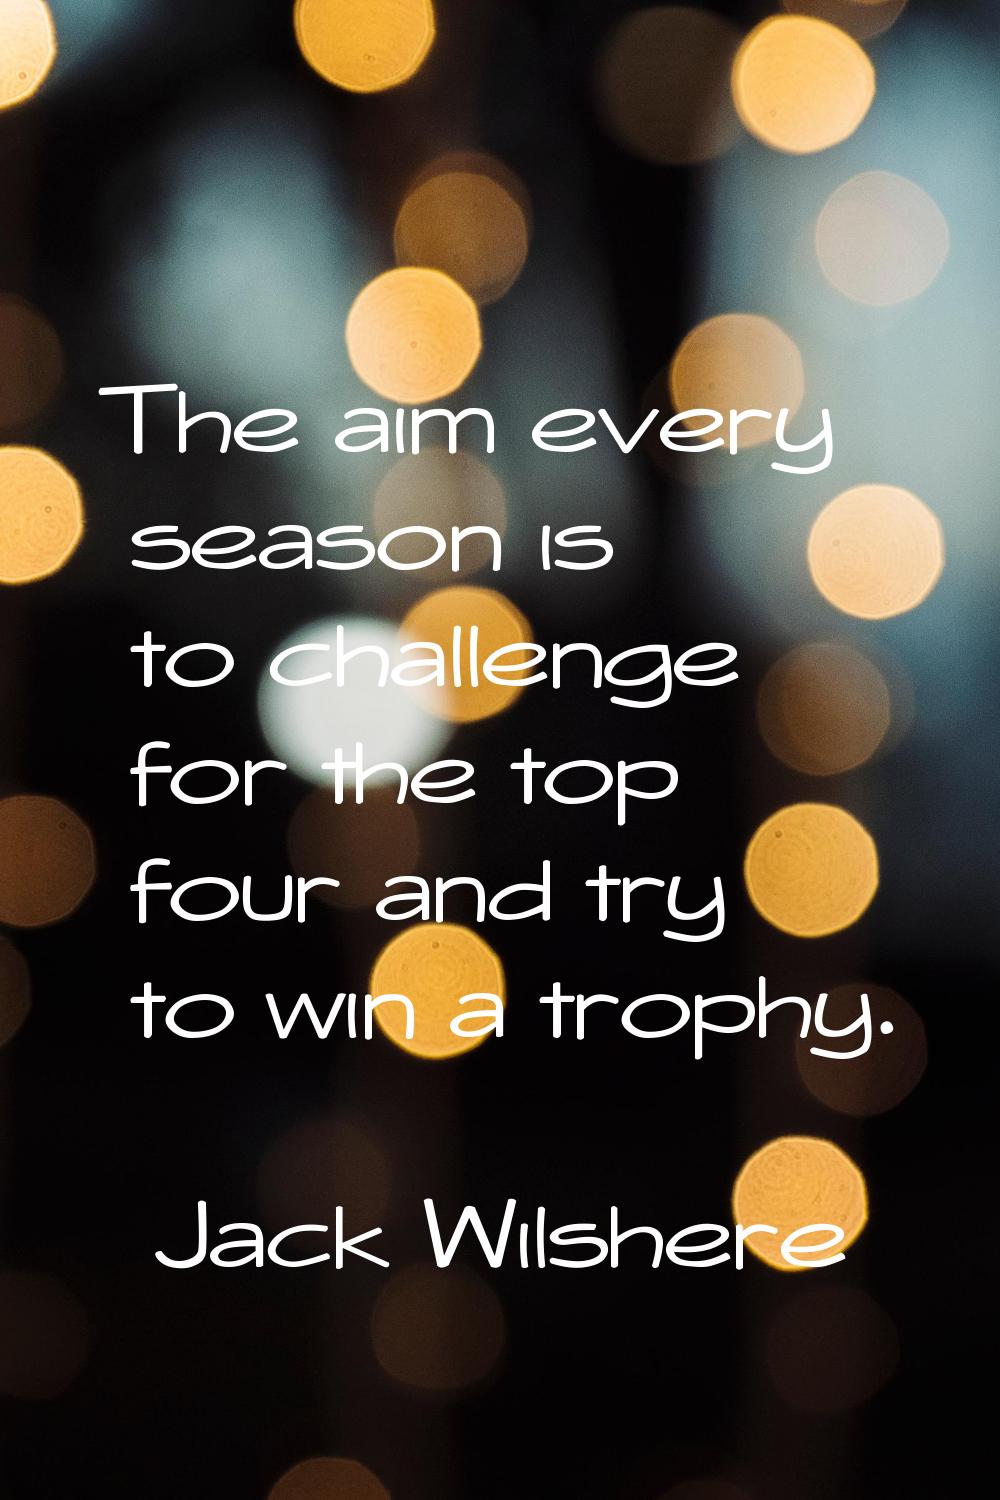 The aim every season is to challenge for the top four and try to win a trophy.